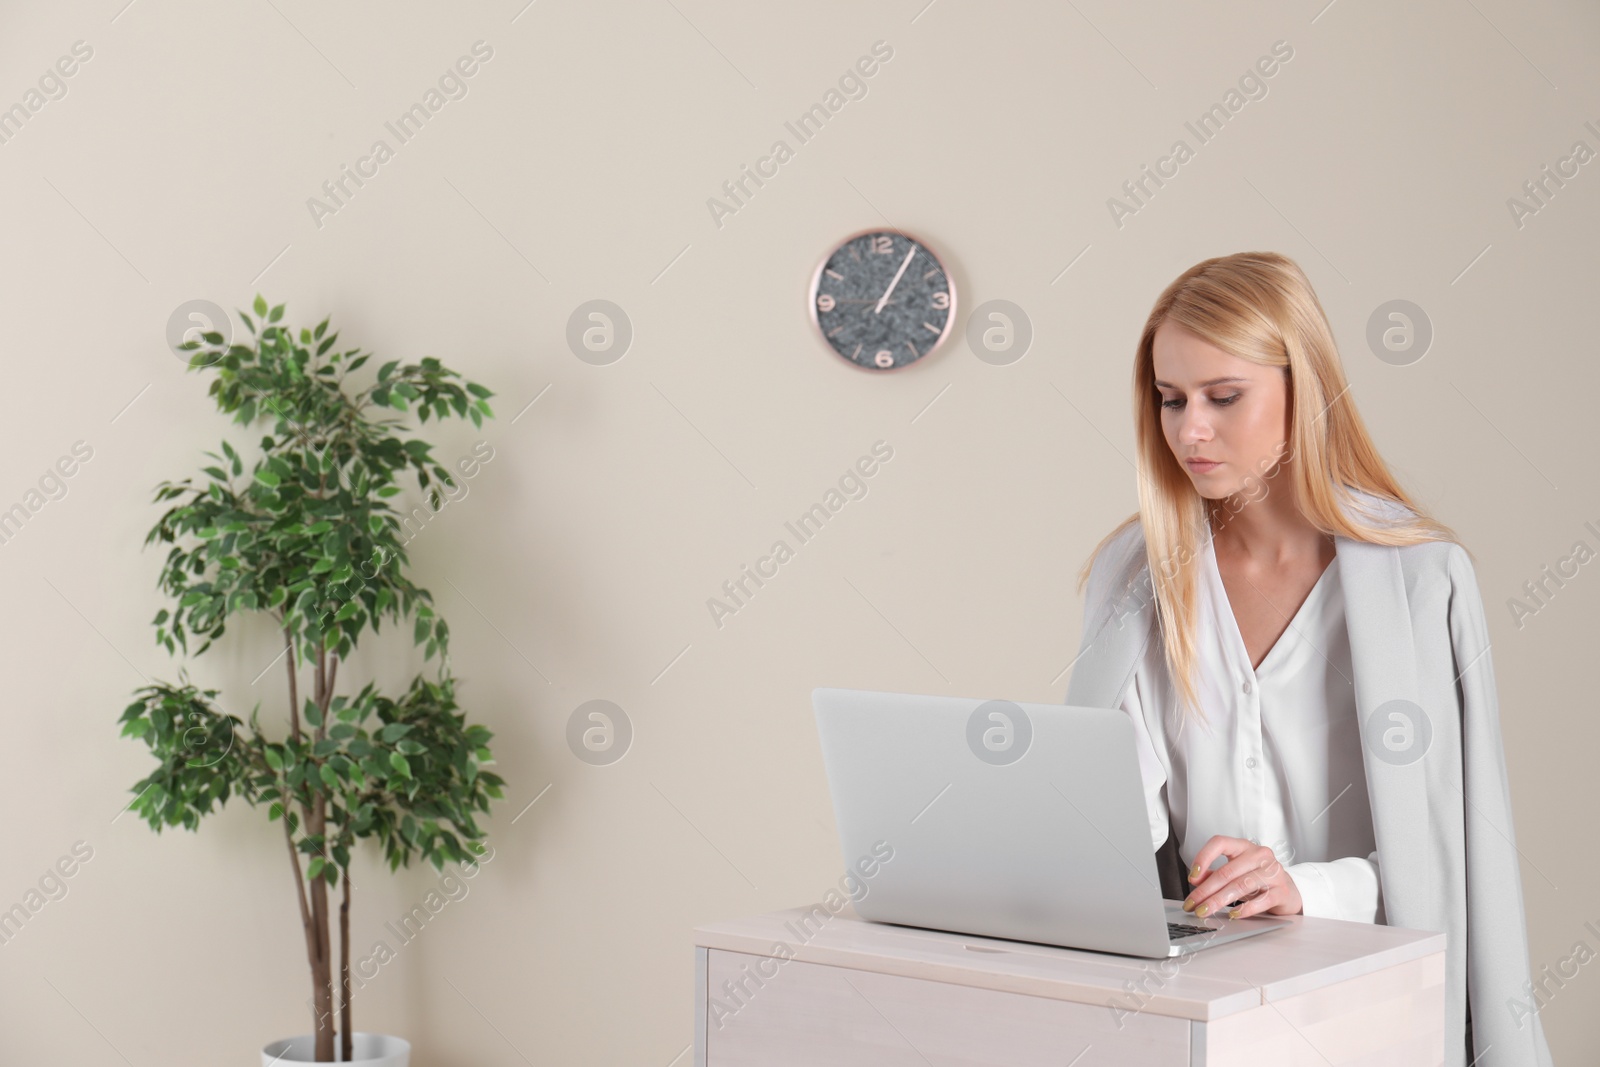 Photo of Young woman using laptop at stand up workplace against light wall